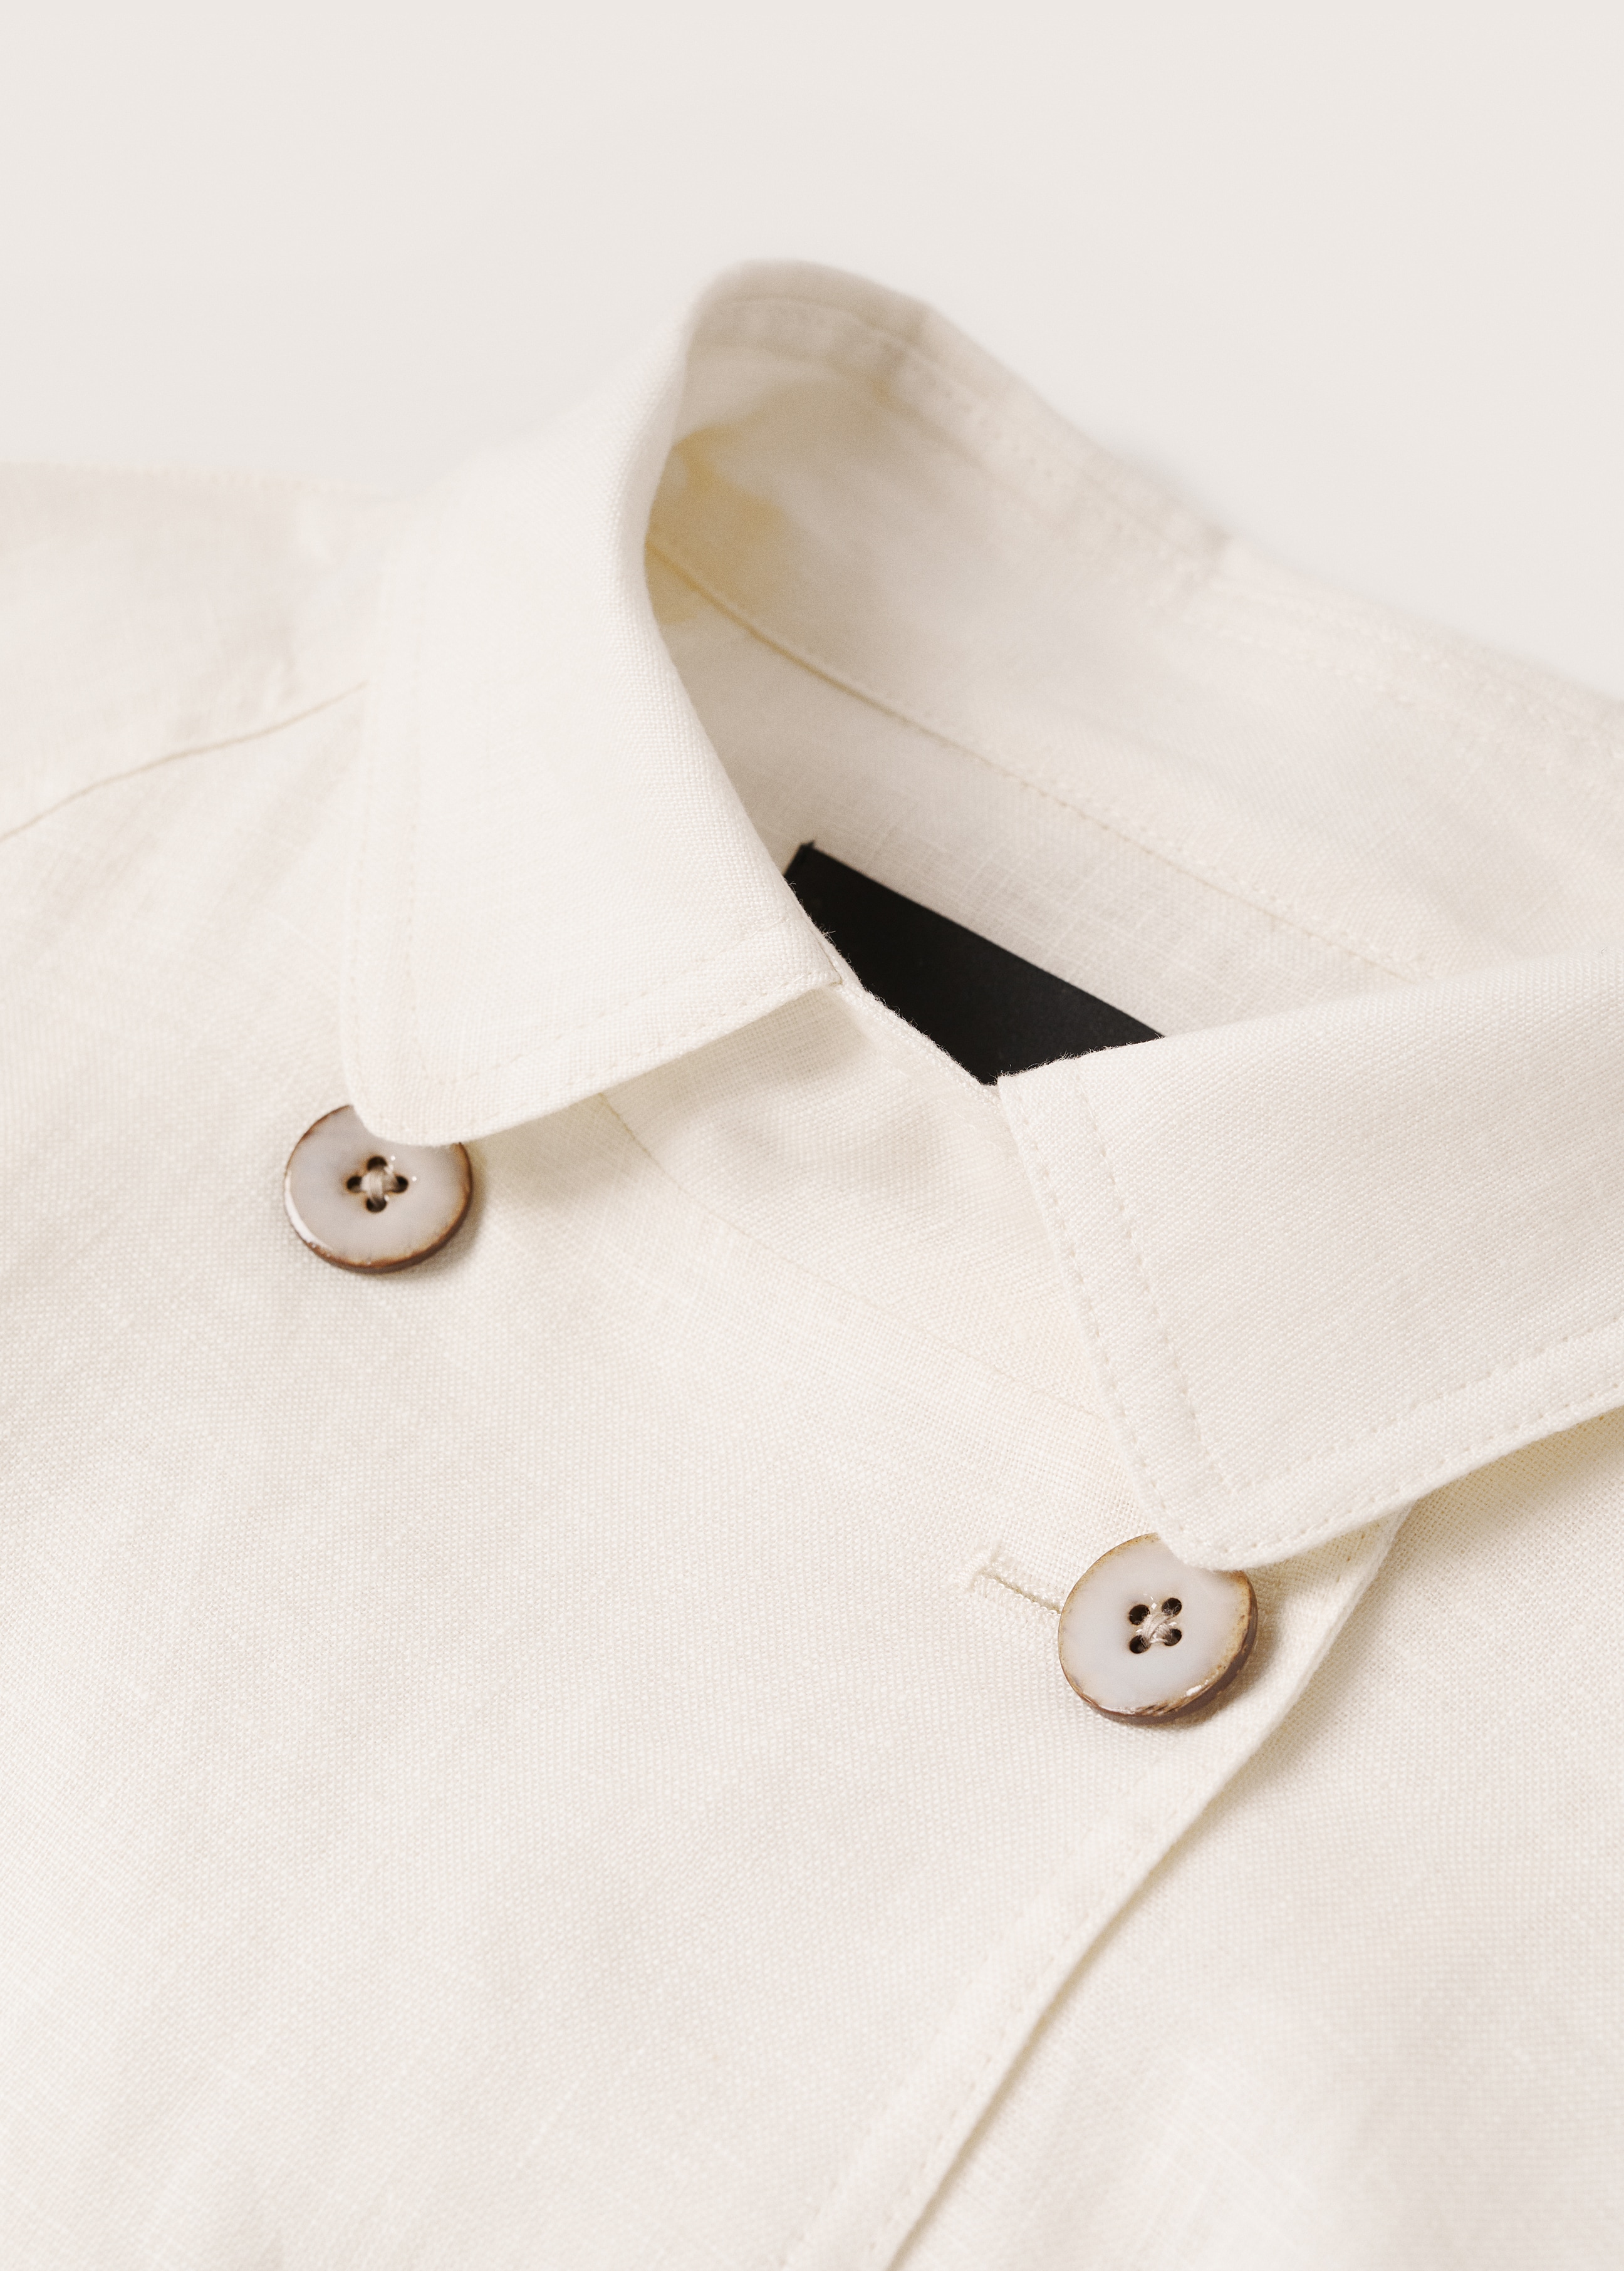 100% linen trench coat - Details of the article 8